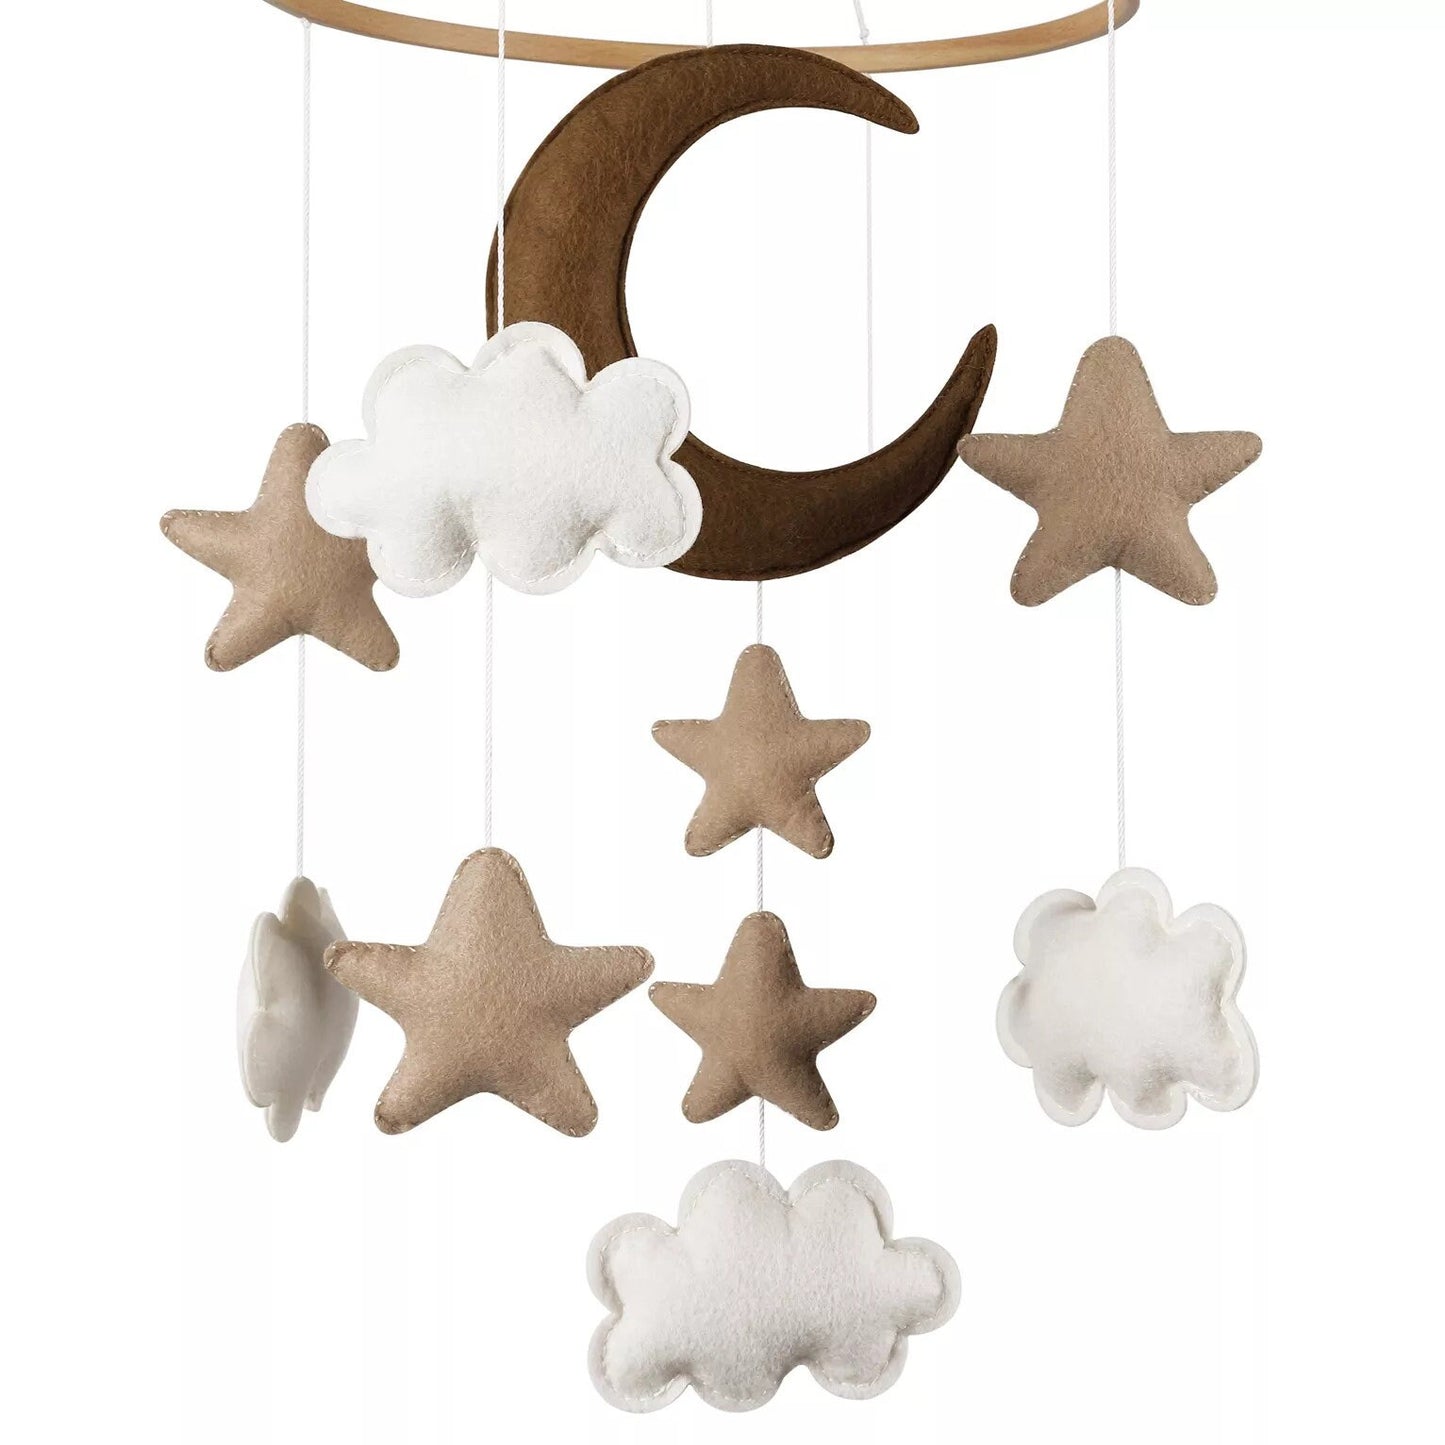 Handmade Felt Brown Moon, Cloud and Stars Nursery Mobile, Gender Neutral Crib Mobile, Baby Room Decoration, Cot Mobile,